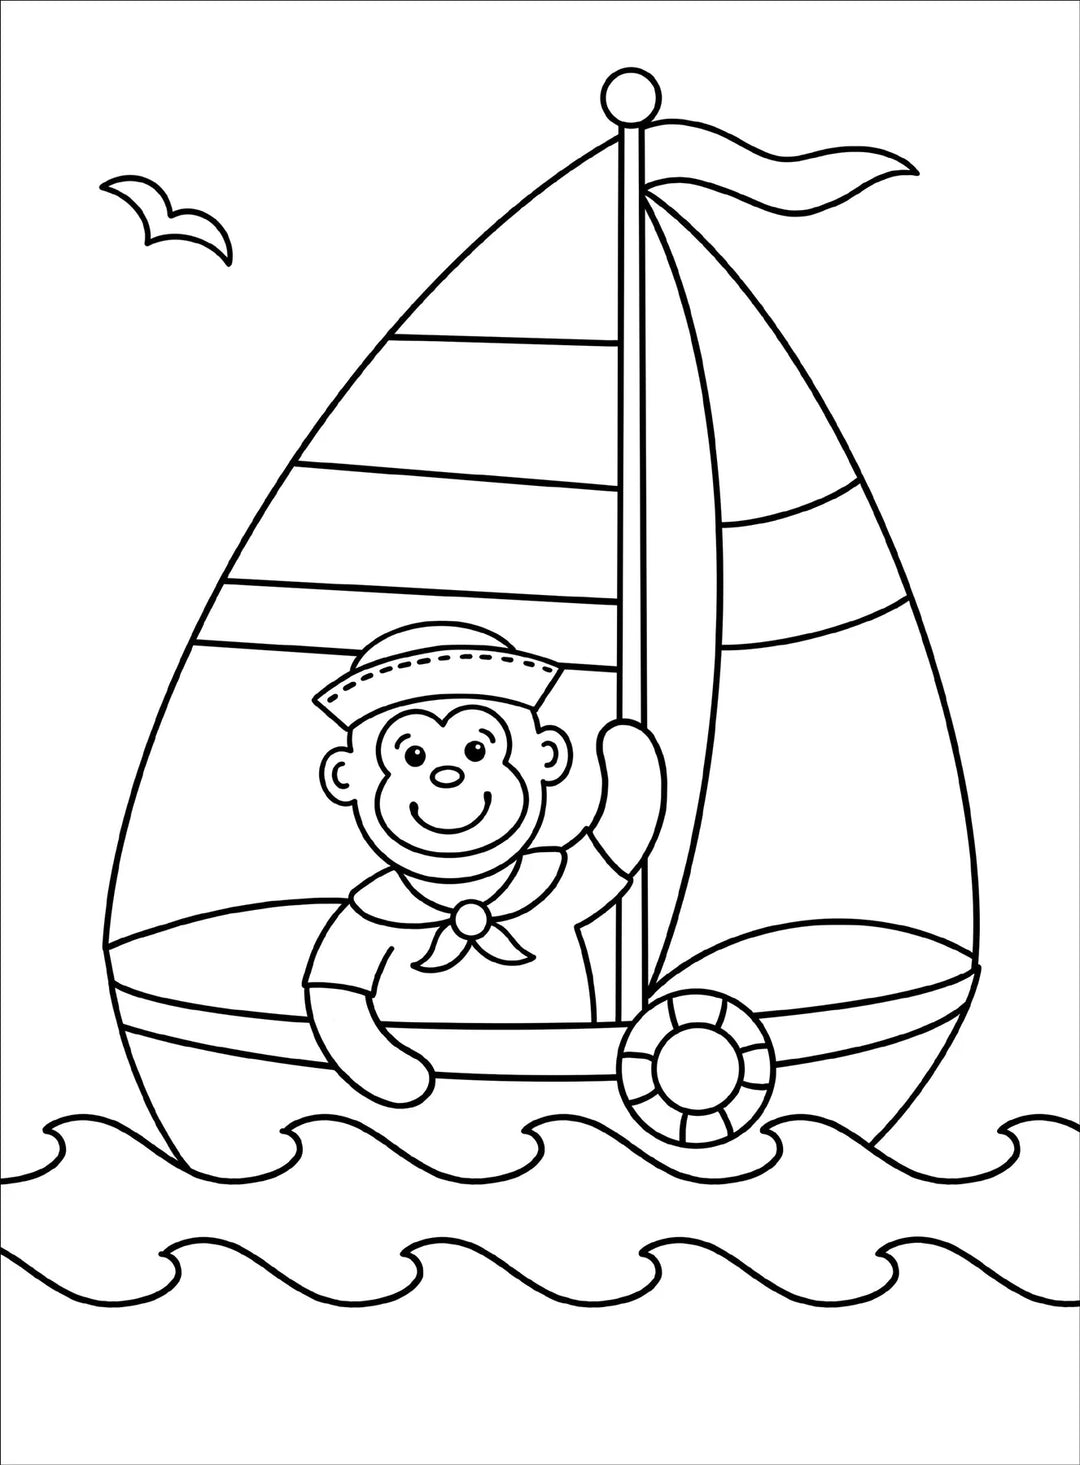 My First Colouring Book - Things That Go